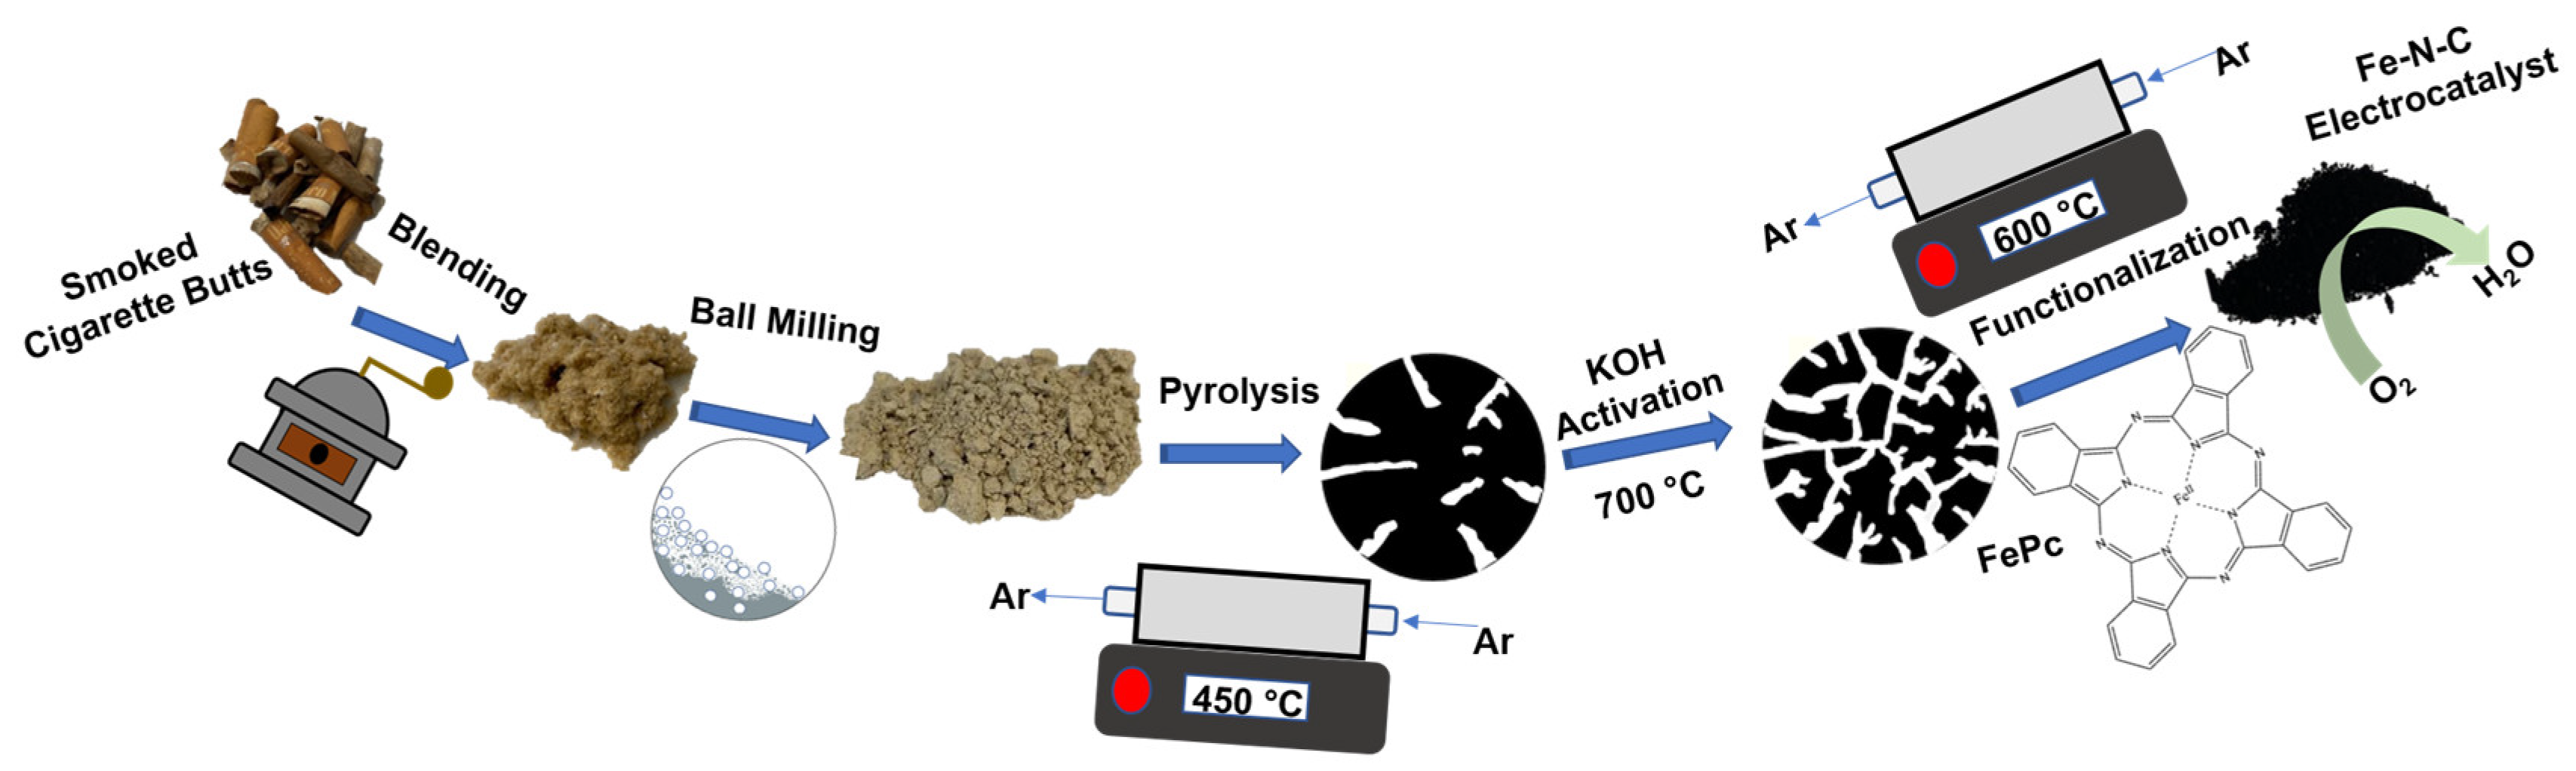 Reaction Waste to Reduction Transformation Life Butts: Alkaline Electrocatalysts | Giving Free for Platinum Neutral Metal-Free Acid, Environment and | Full-Text Oxygen in Cigarette Catalysts New Group into